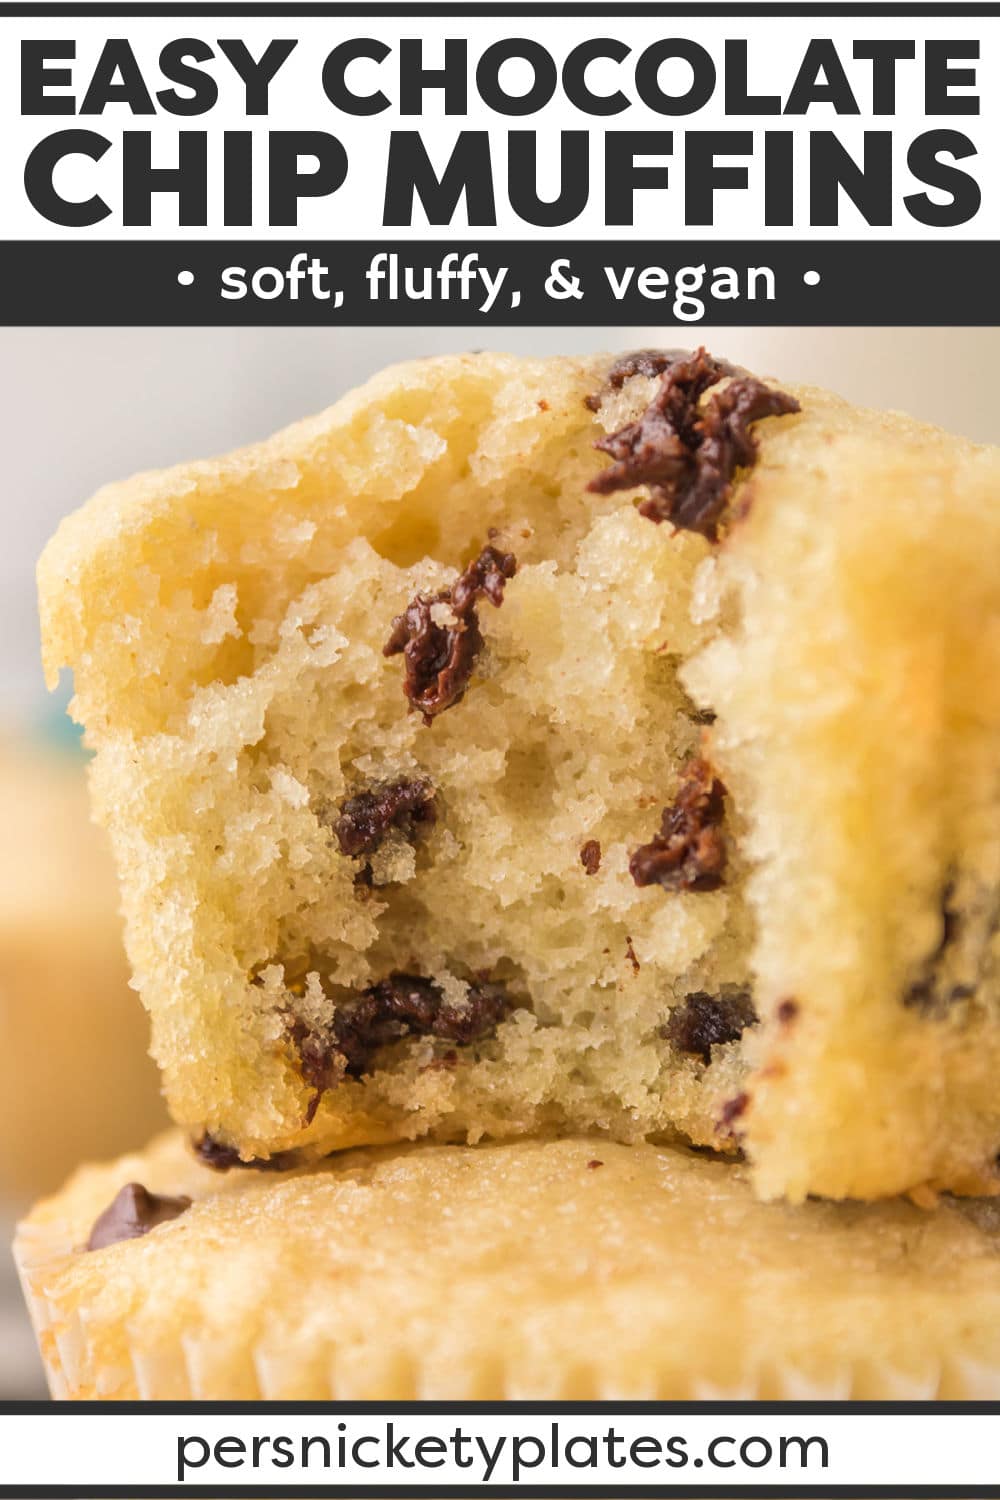 These easy and fluffy vegan chocolate chip muffins are made in one bowl with simple baking staples! Use your favorite dairy-free milk, and vegan chocolate chips combined with flour, sugar, and other pantry staples that you probably already have on hand and bake them nice and high! Enjoy freshly baked muffins for breakfast, brunch, or a snack, or slather them with vegan frosting for cupcakes!  | www.persnicketyplates.com